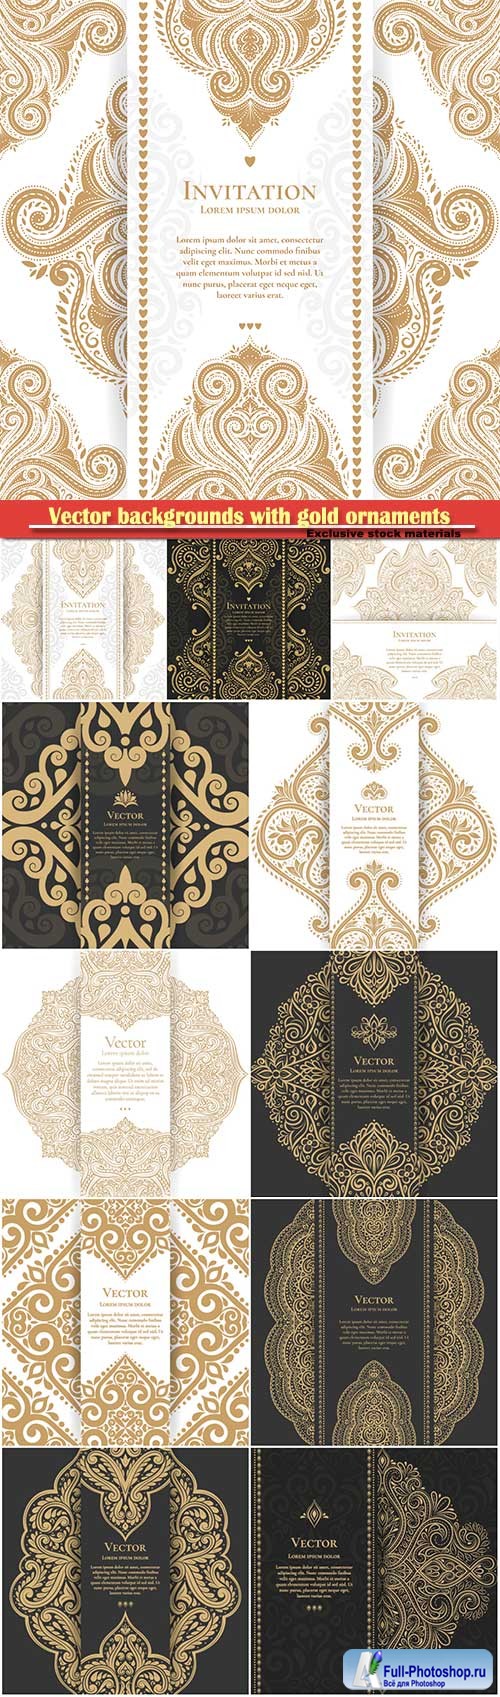 Vector vintage backgrounds with gold ornaments and patterns